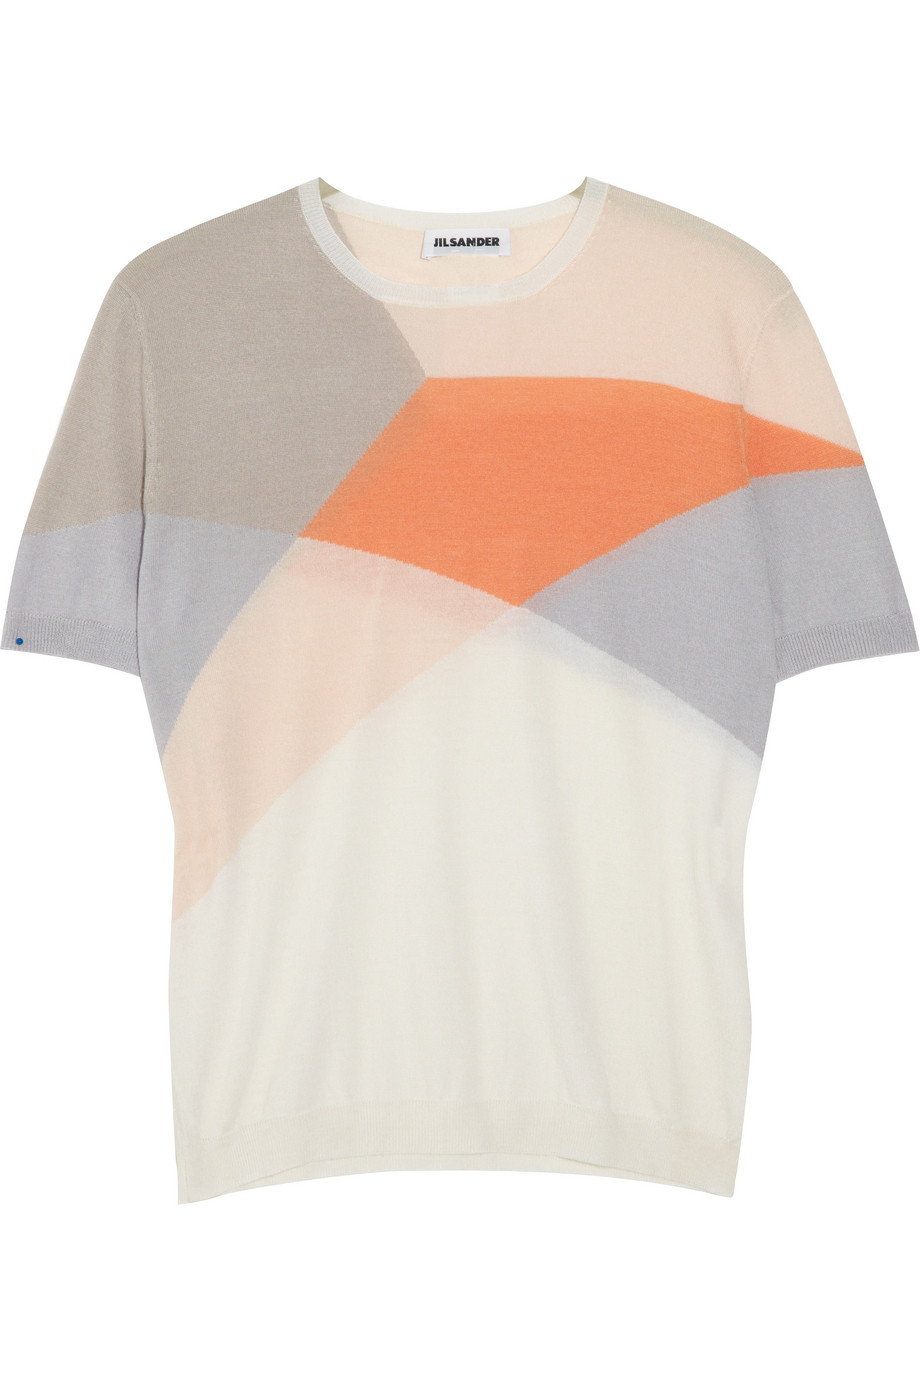 Jil Sander Color-block Cashmere and Silk-blend Top in Gray | Lyst